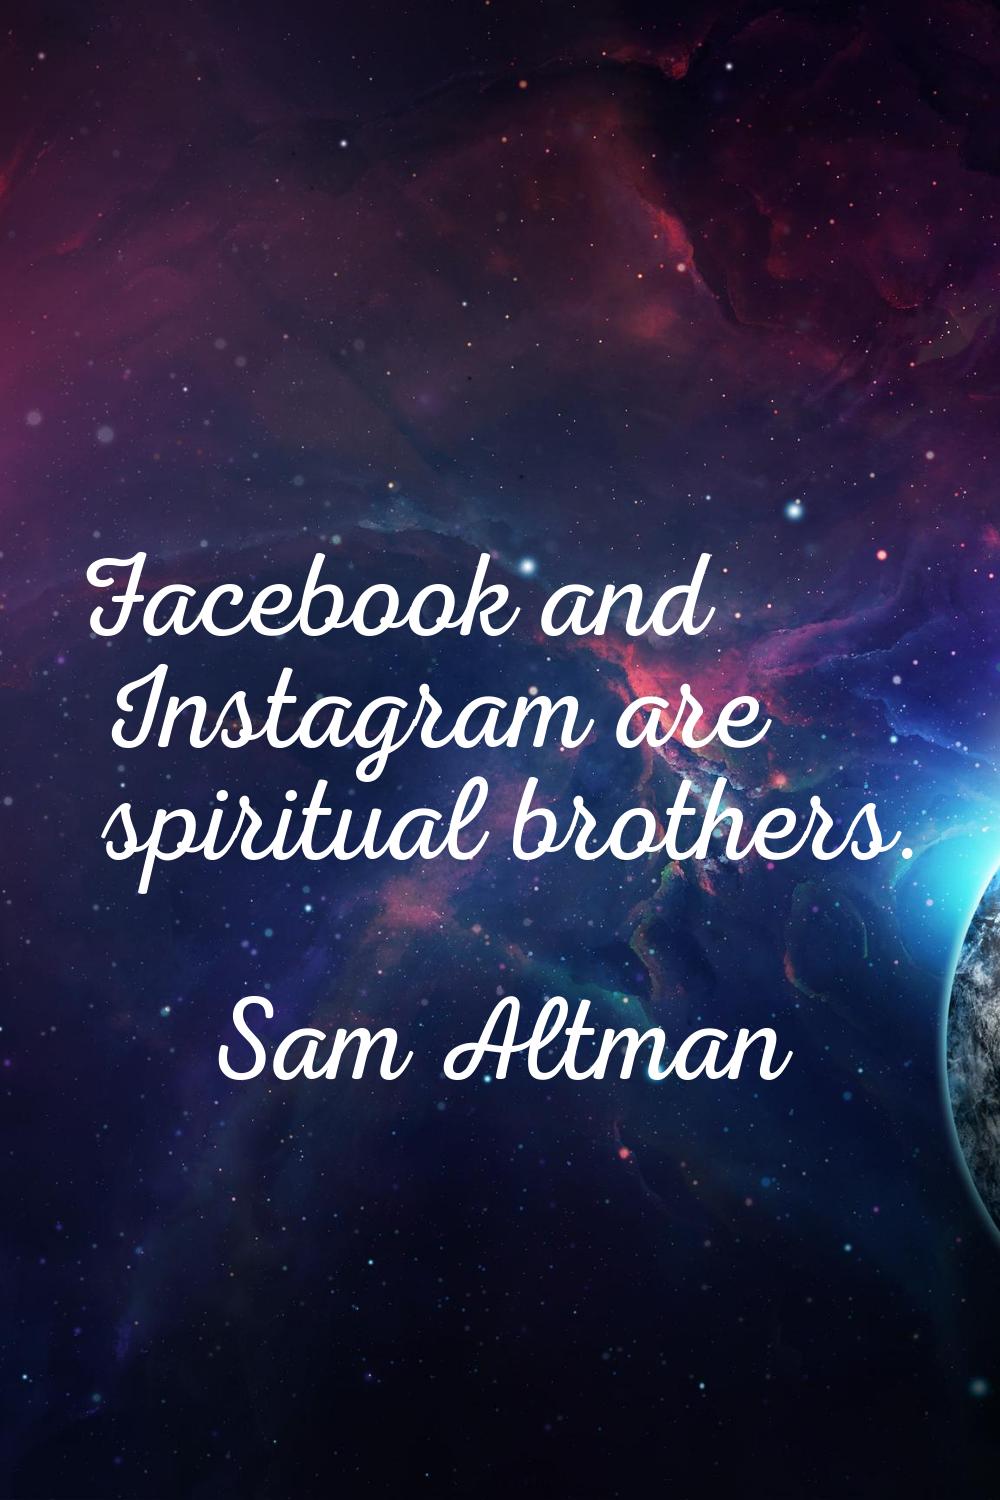 Facebook and Instagram are spiritual brothers.